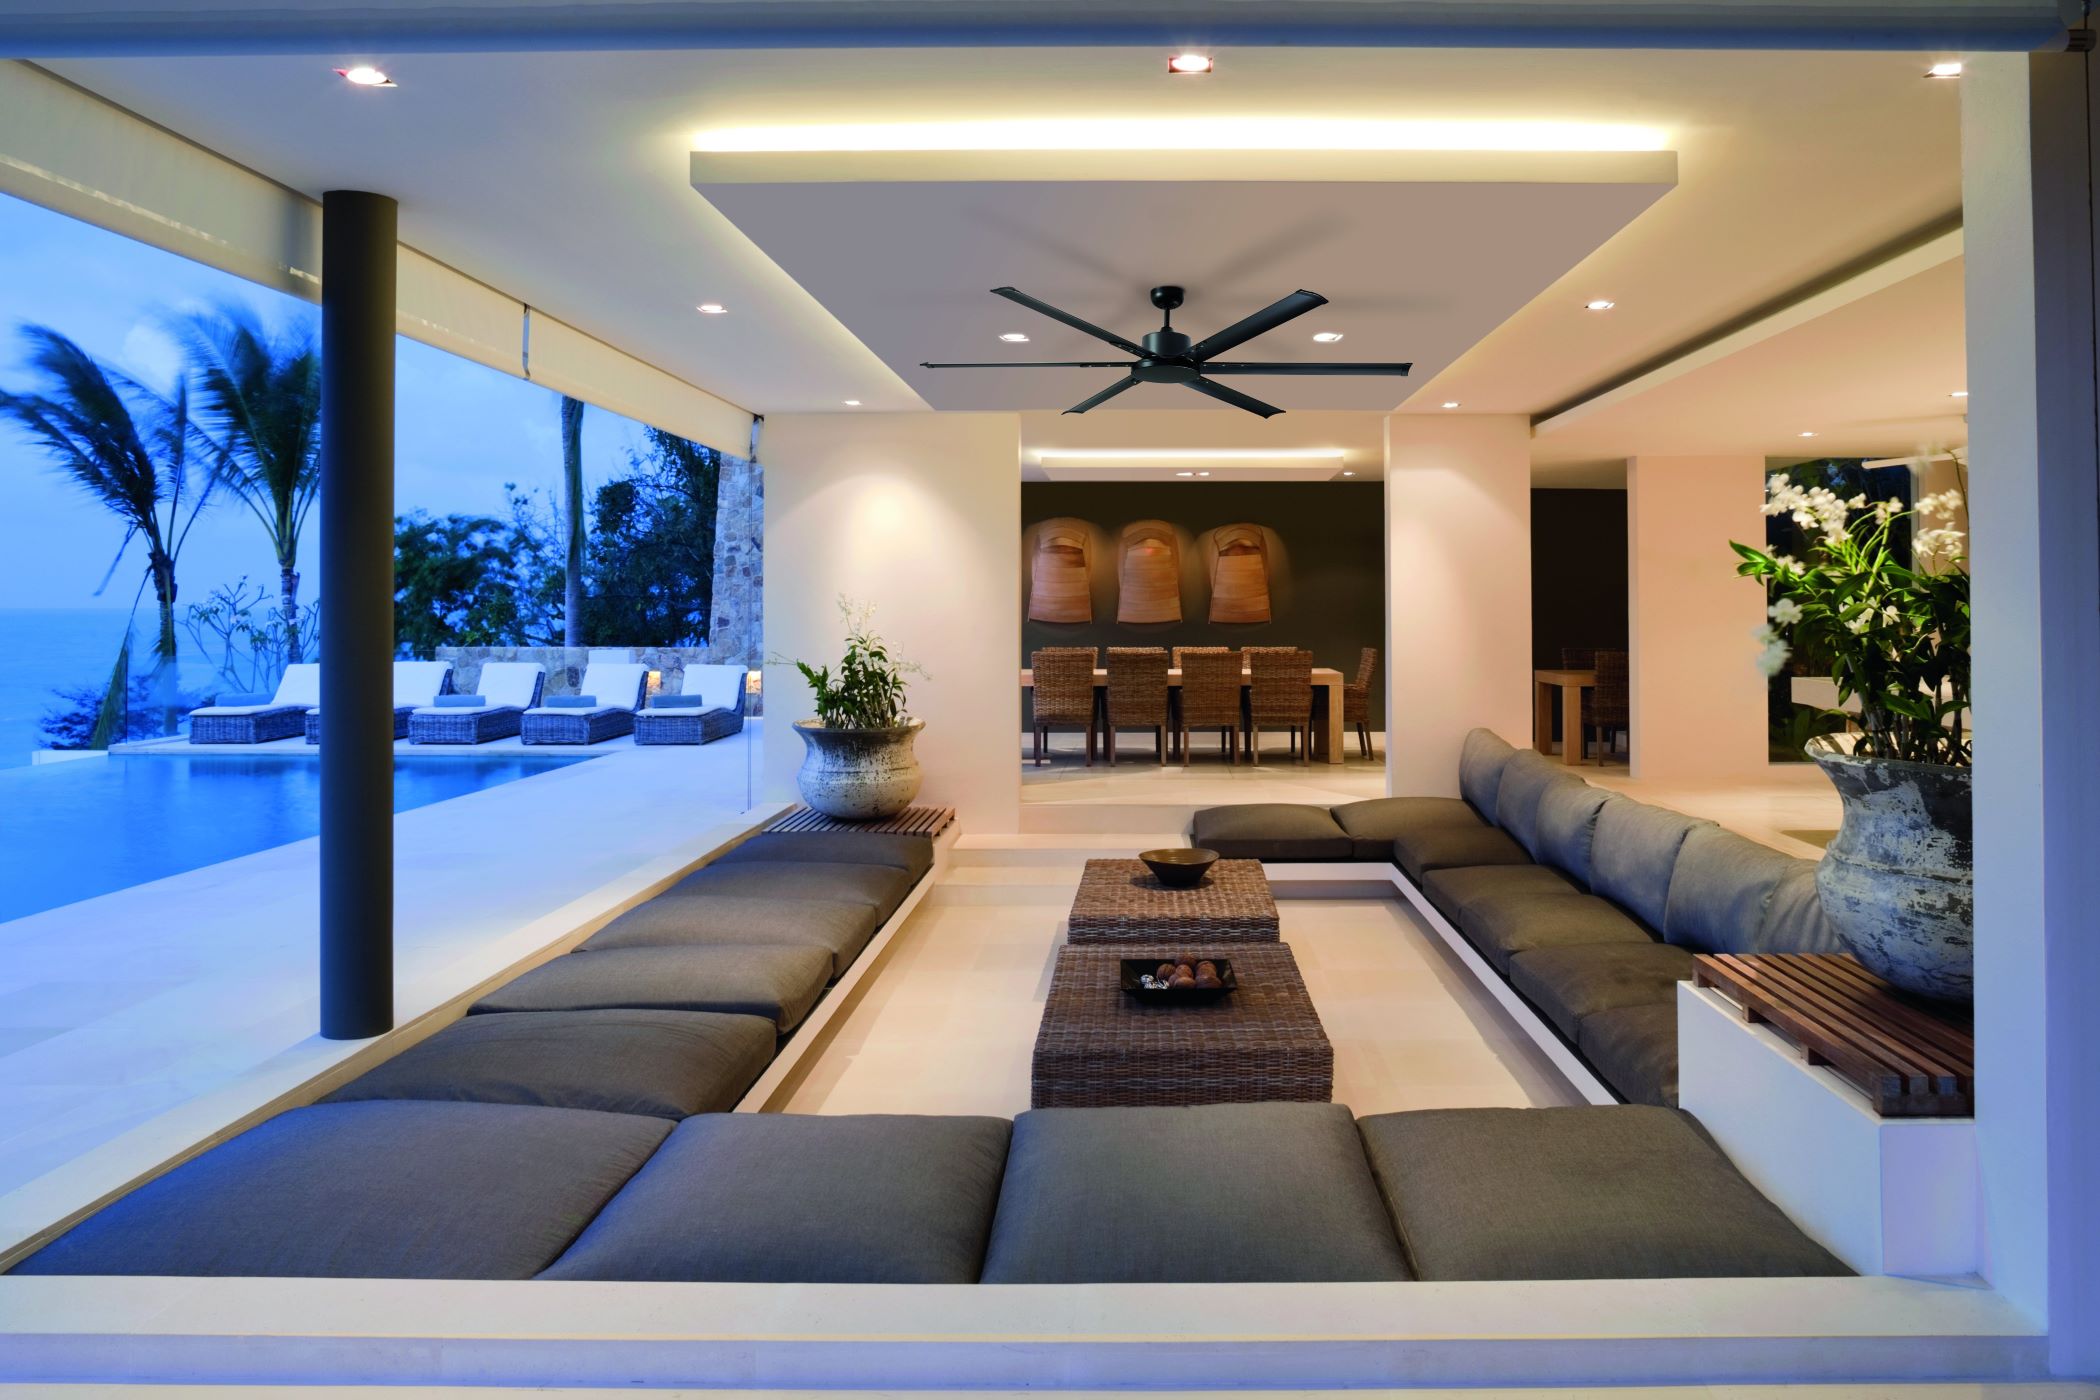 How Good Are Design House Ceiling Fans